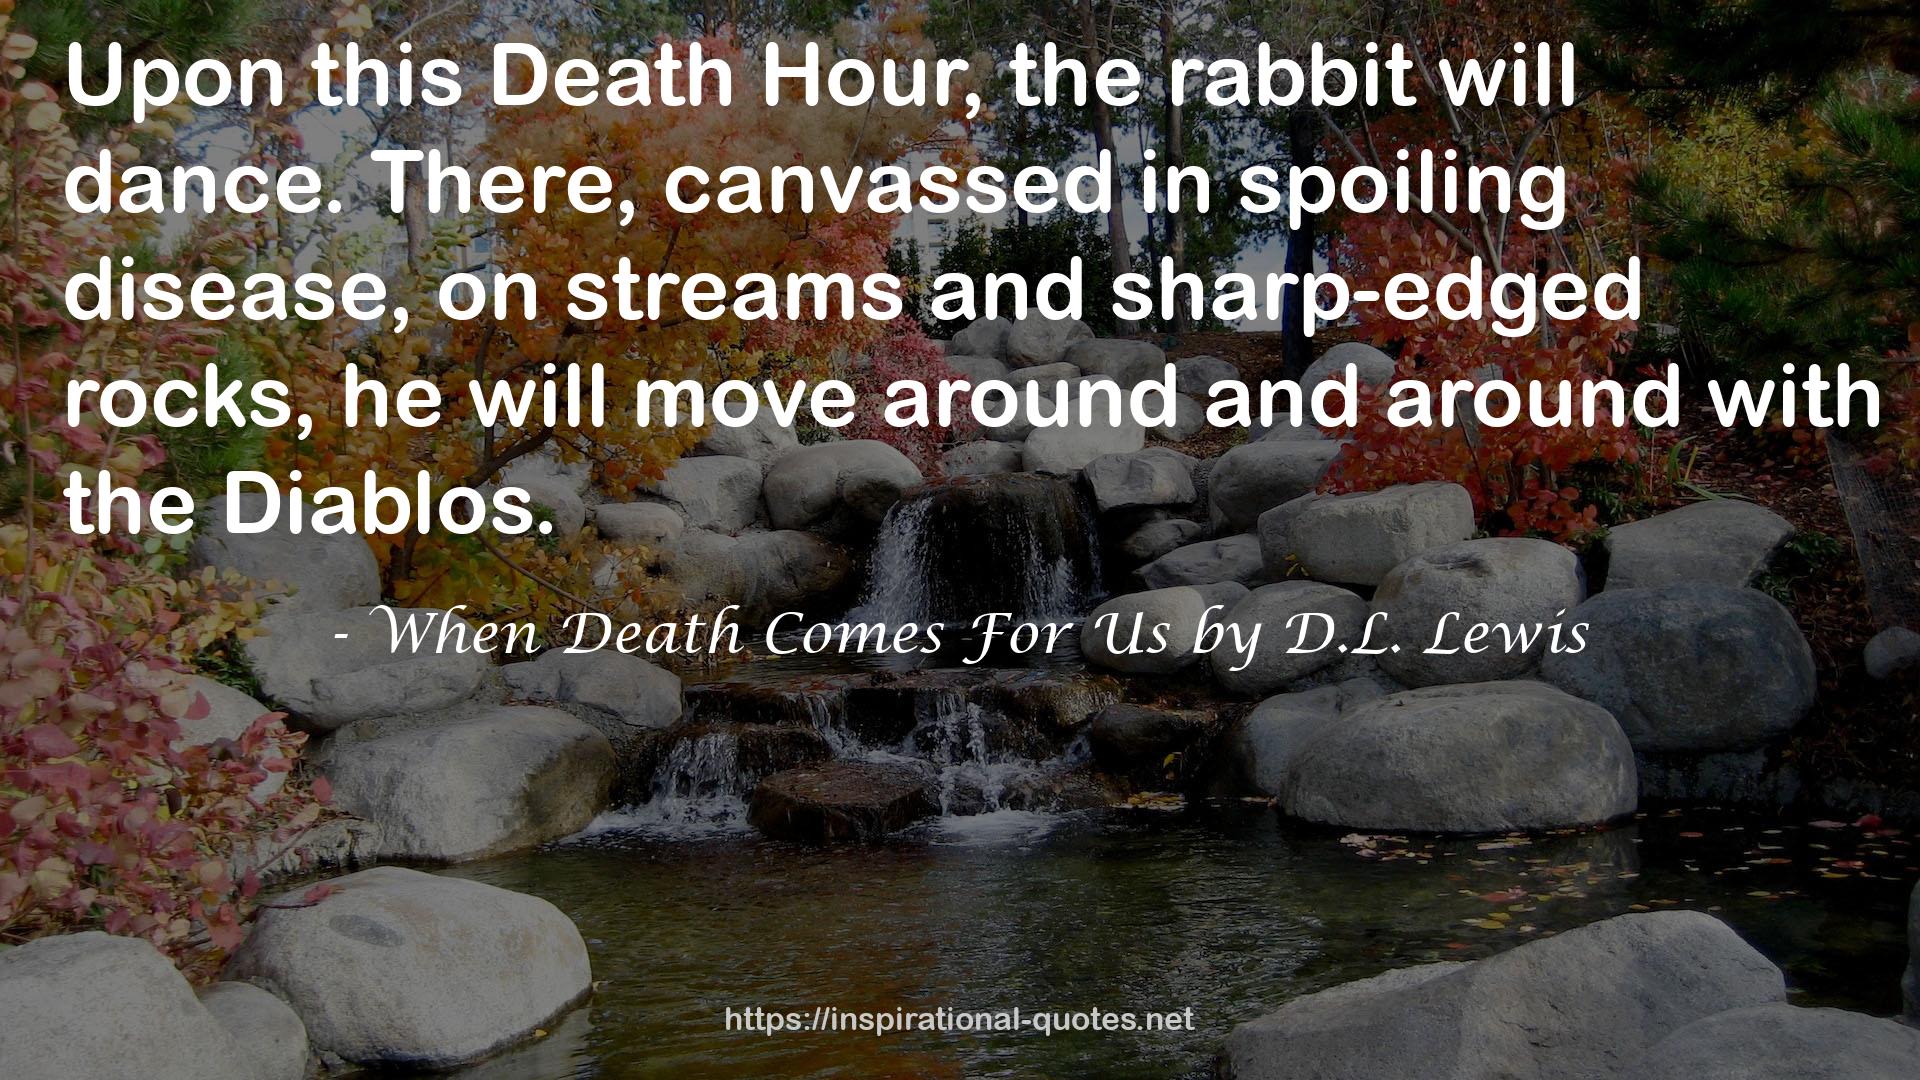 When Death Comes For Us by D.L. Lewis QUOTES